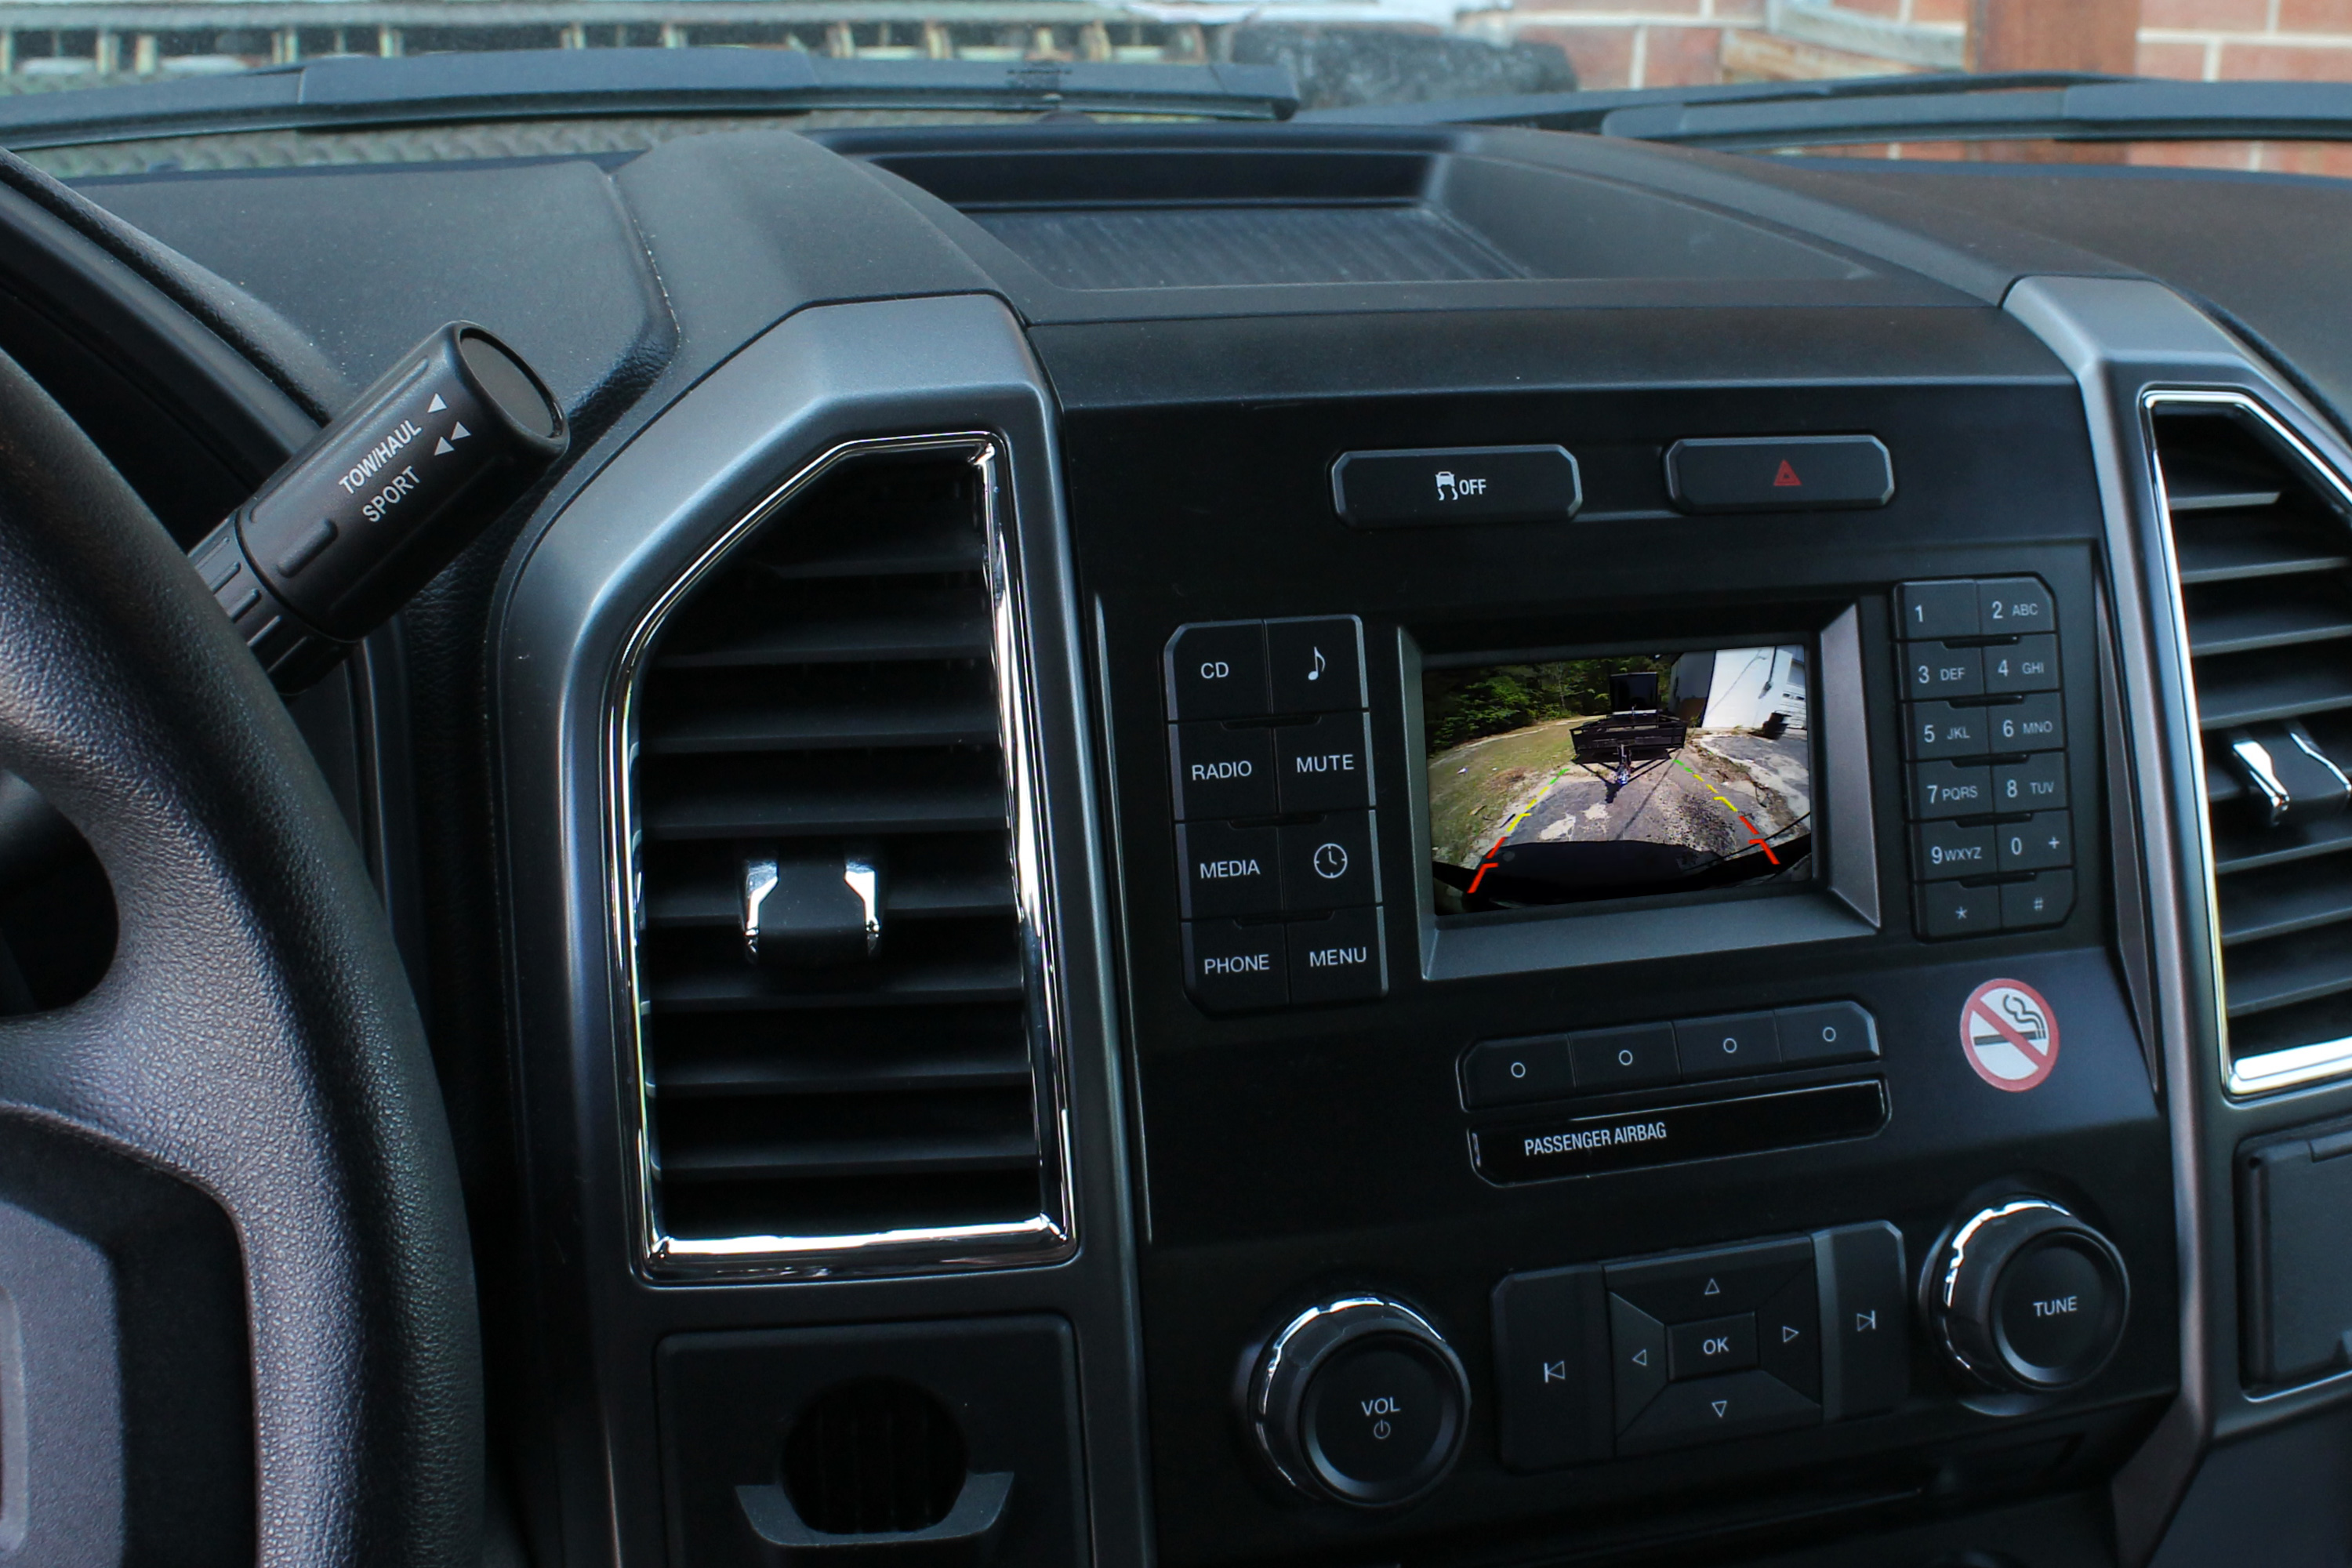 2015-2017 Ford F150 tailgate handle camera installed with video feed to factory 4.2-inch LCD screen